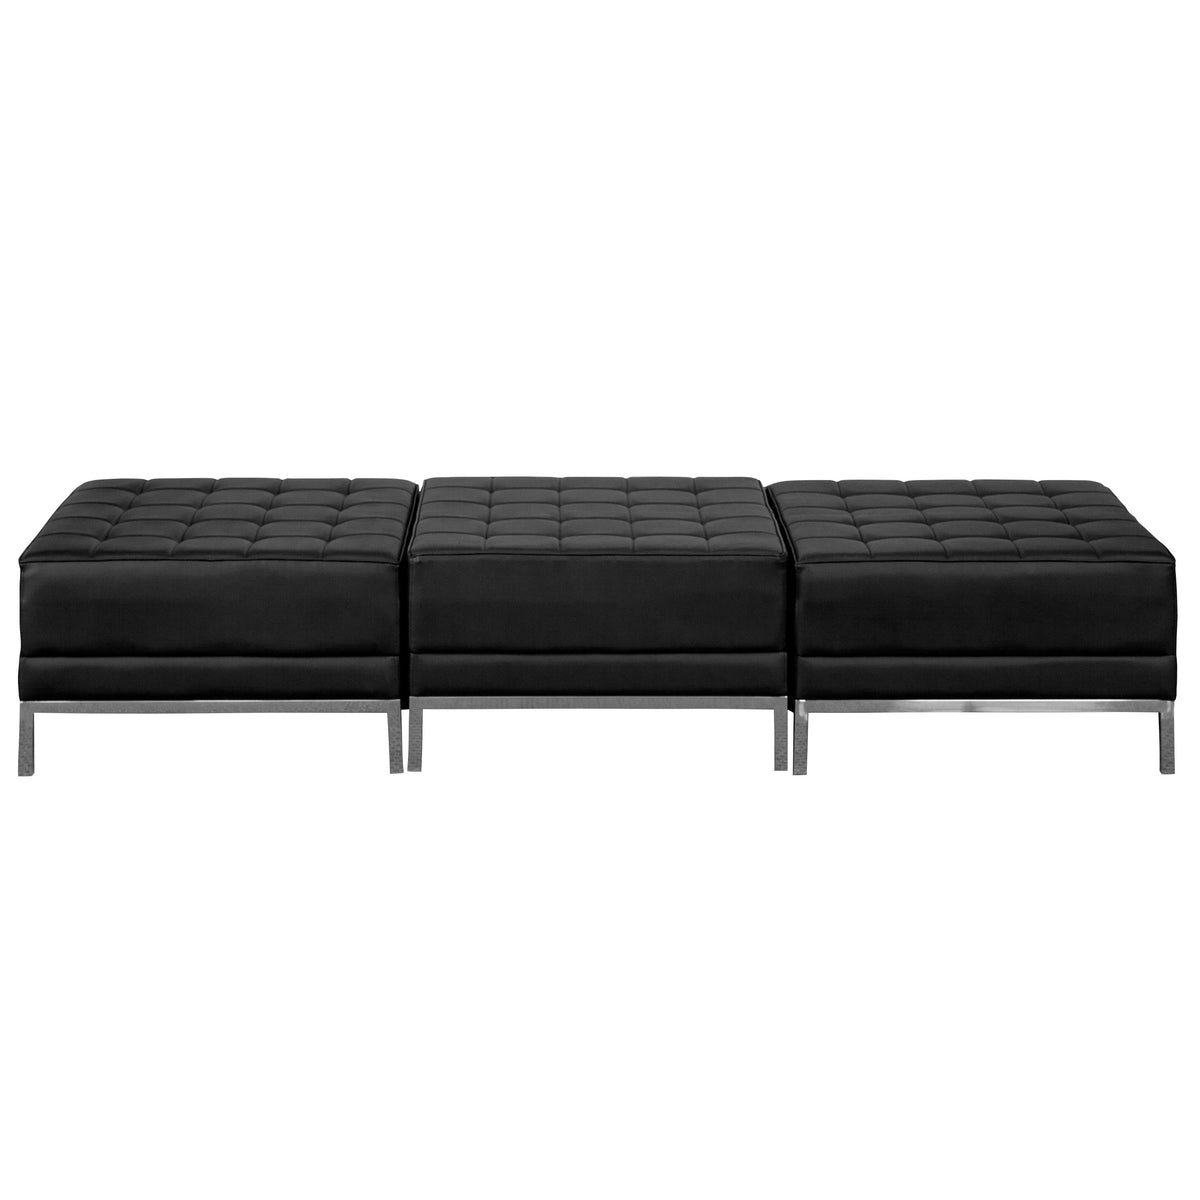 Black |#| Black LeatherSoft Backless Three Seat Bench w/Integrated Stainless Steel Legs